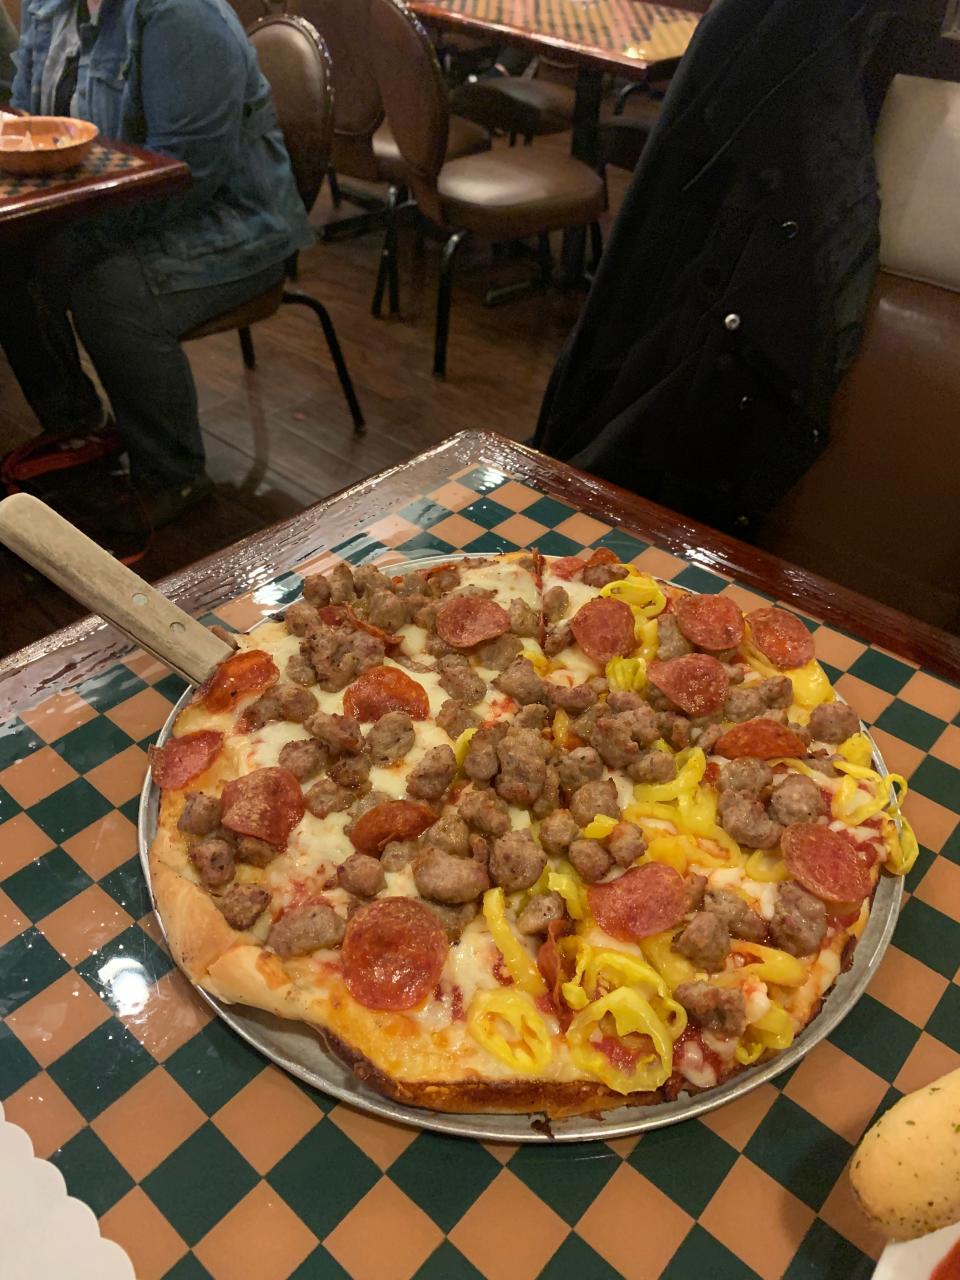 A sausage and pepperoni pizza with banana peppers is served at Angie's Italian Restaurant in Barberton.